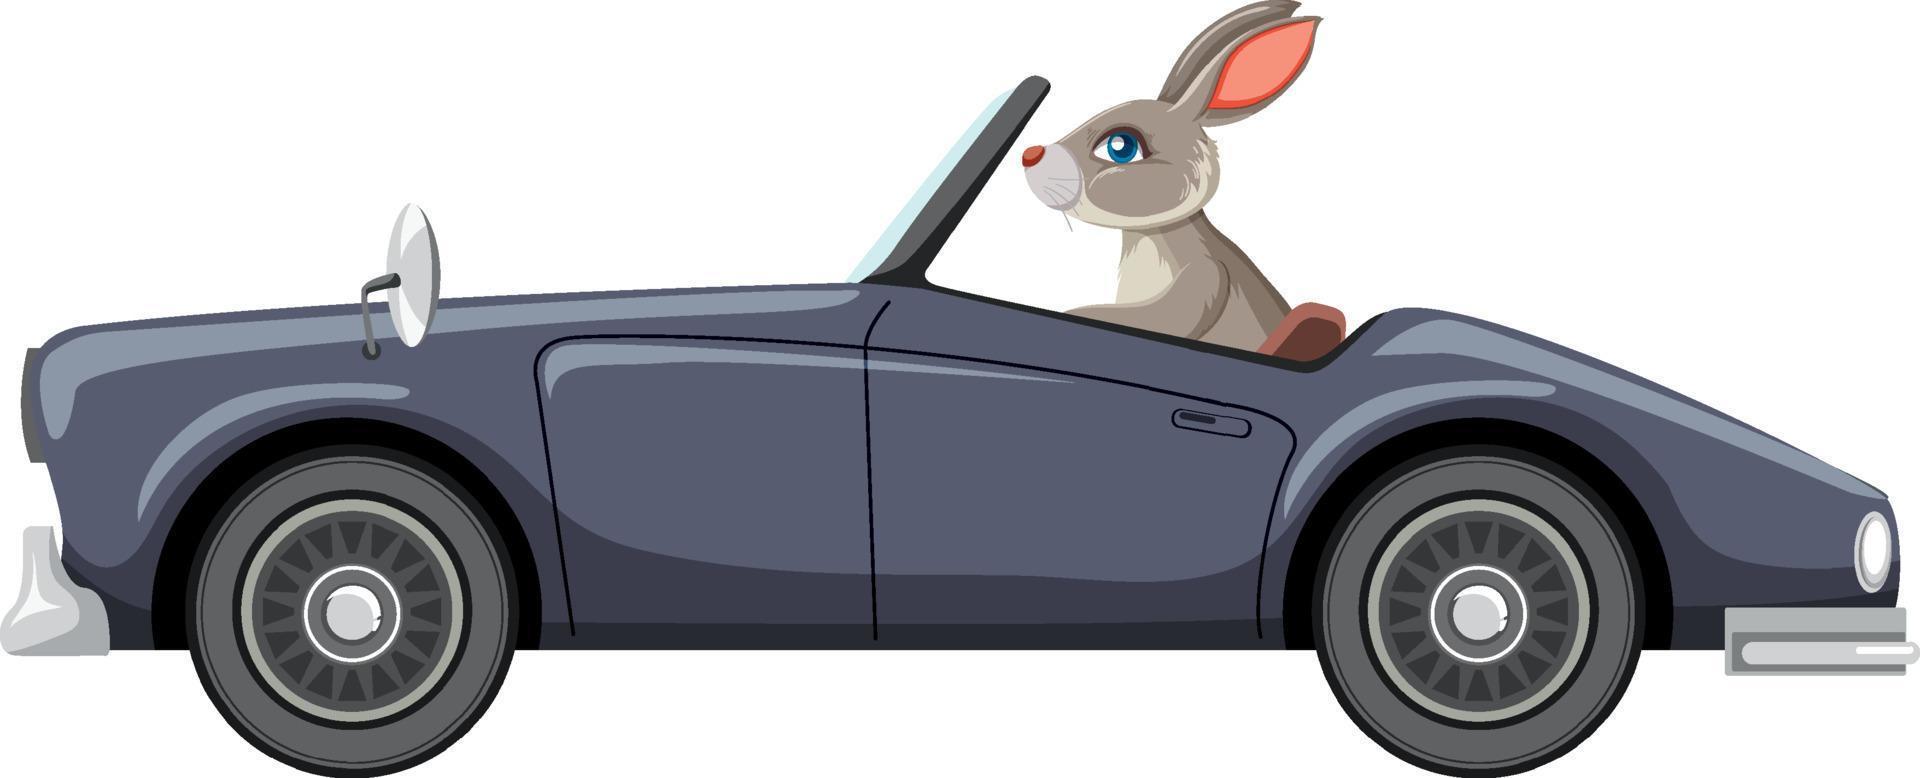 A rabbit in classic car on white background vector